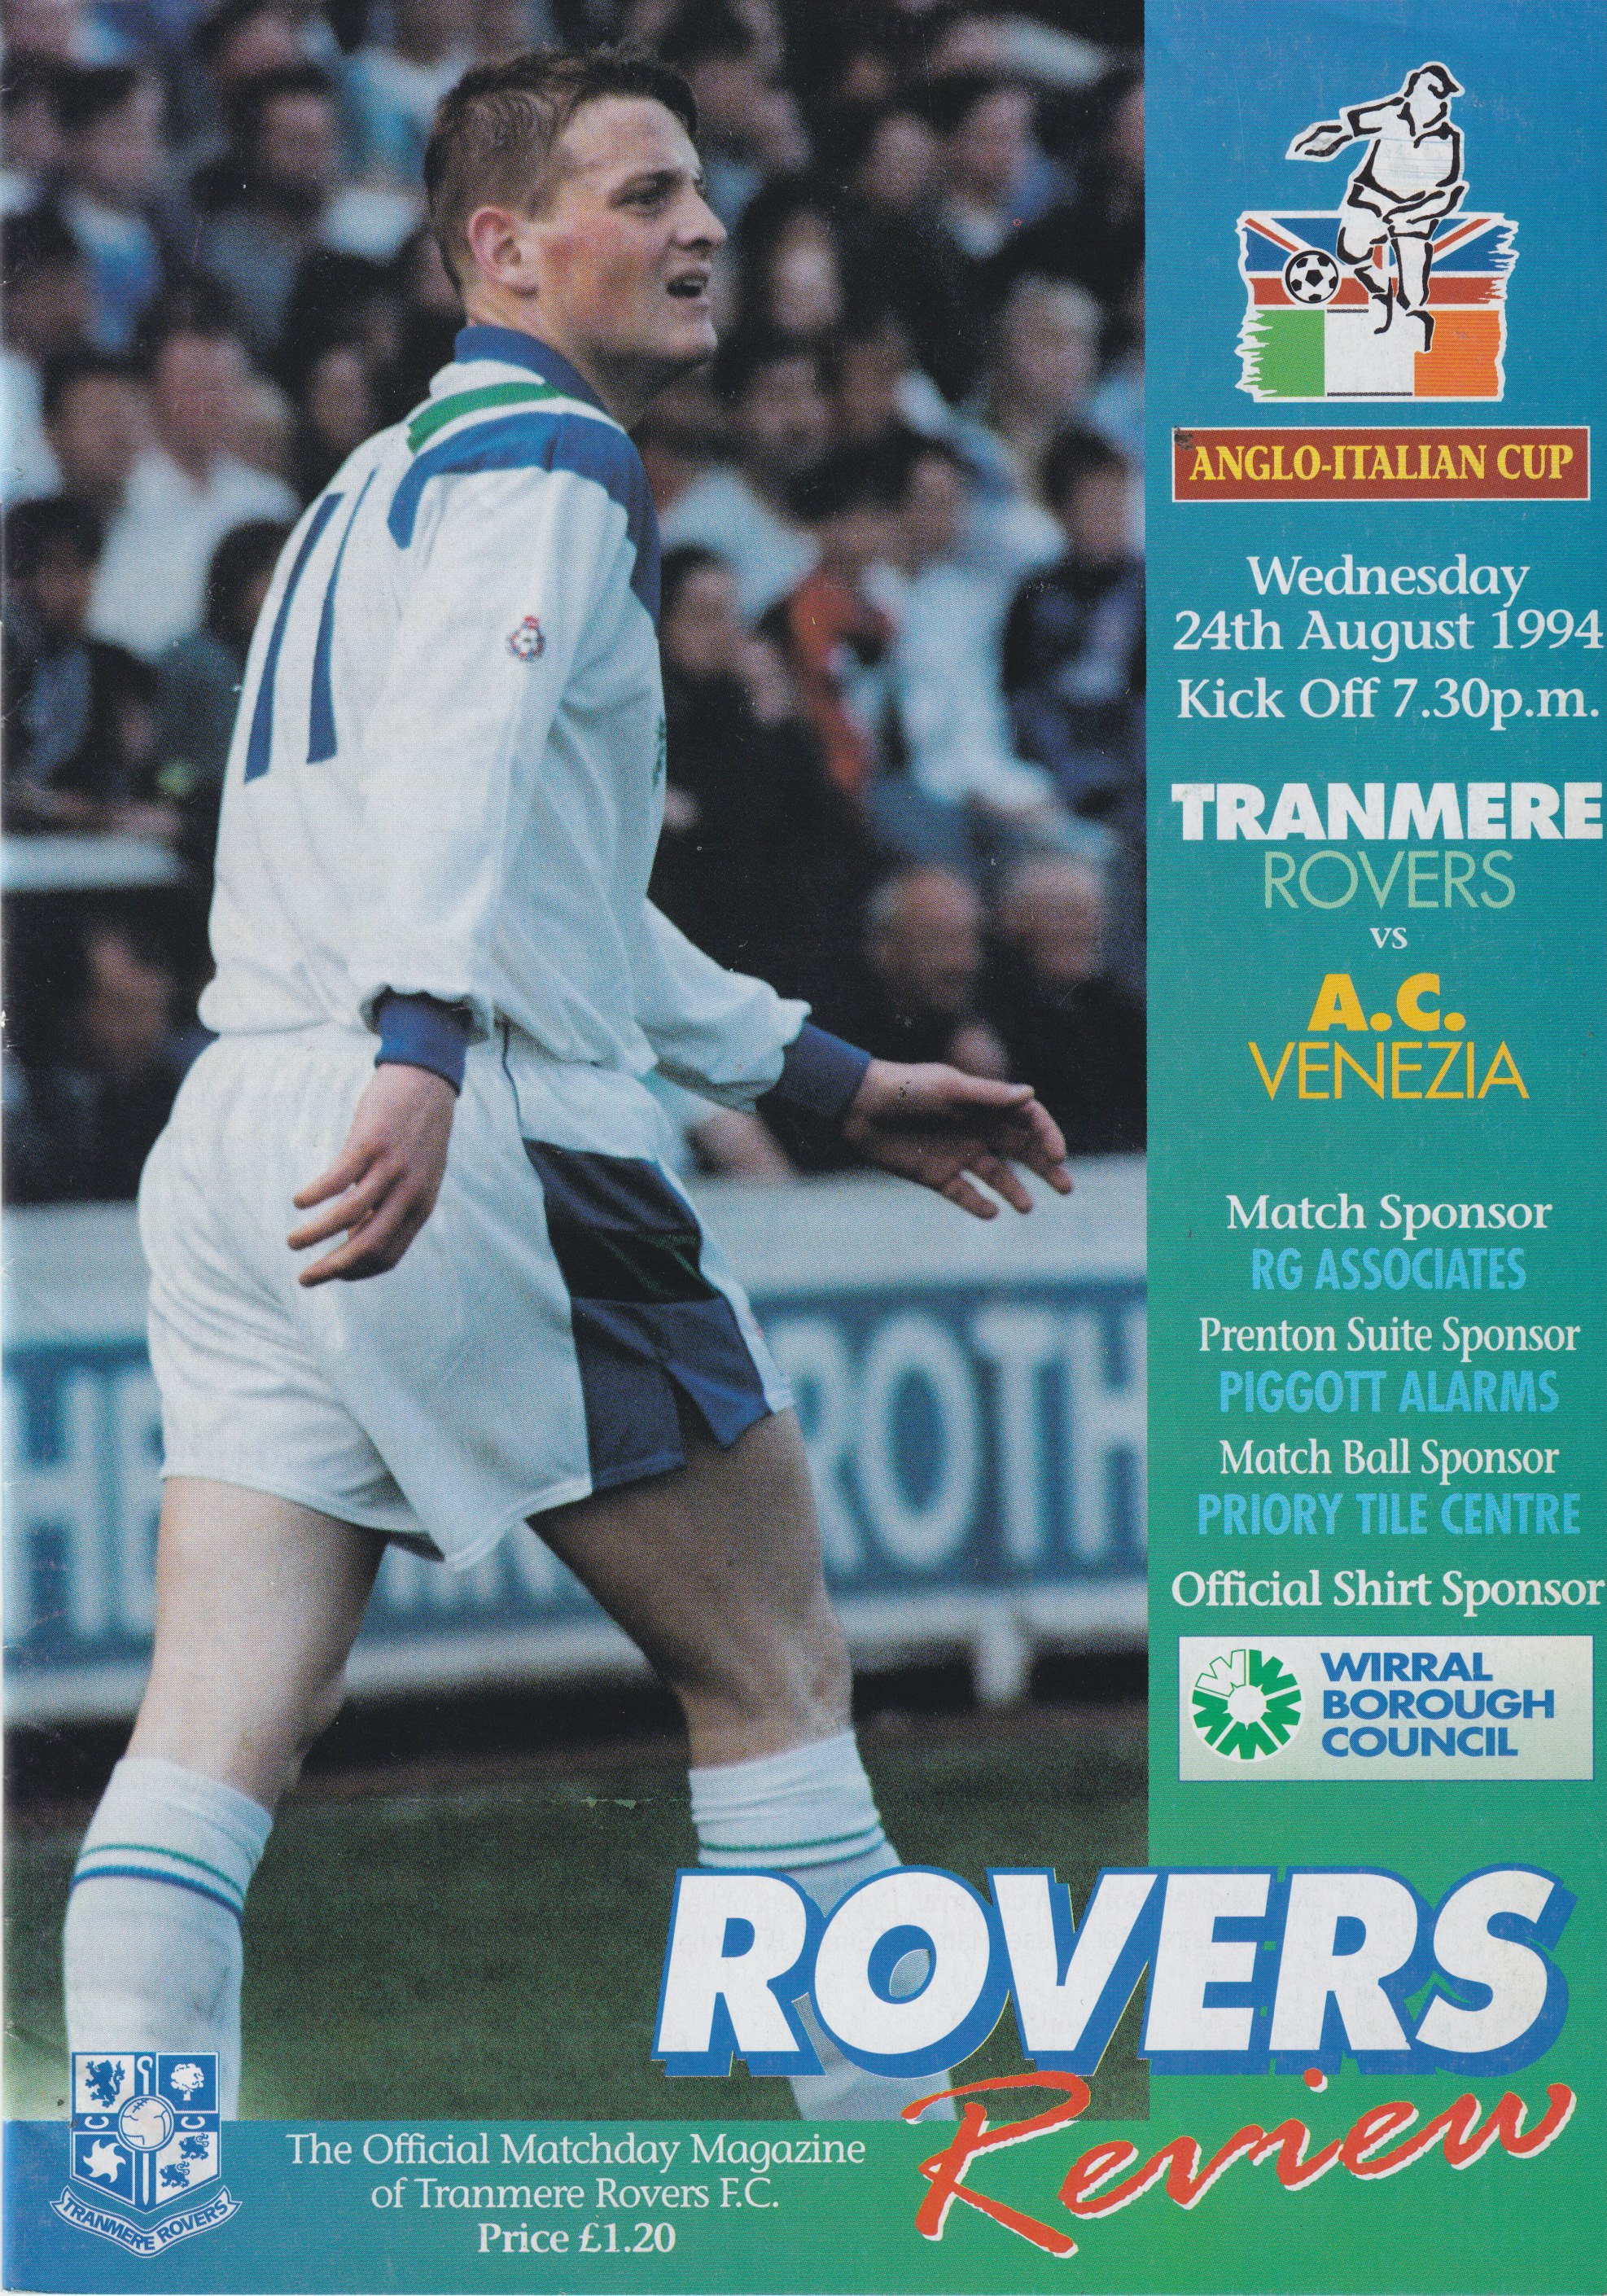 Match Programme For {home}} 2-2 Venezia, Anglo Italian Cup, 1994-08-24